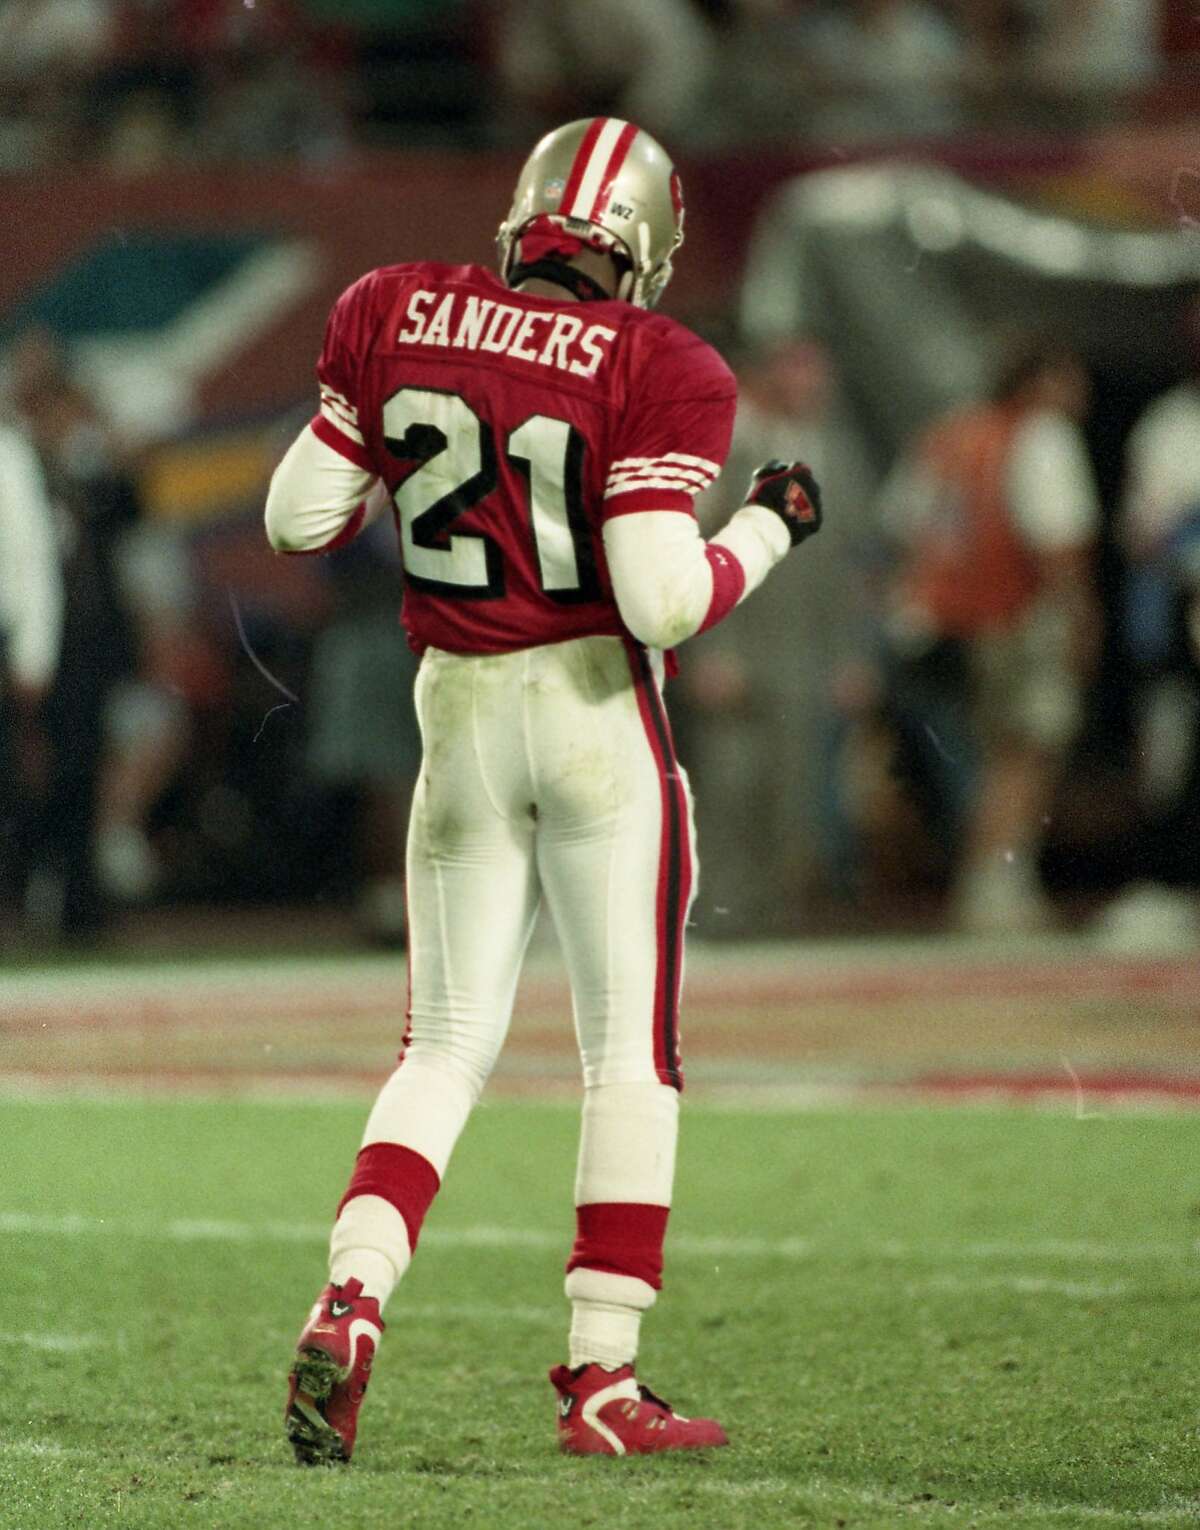 Super Bowl XXIX: 25 years ago, 49ers knew they had it all the way